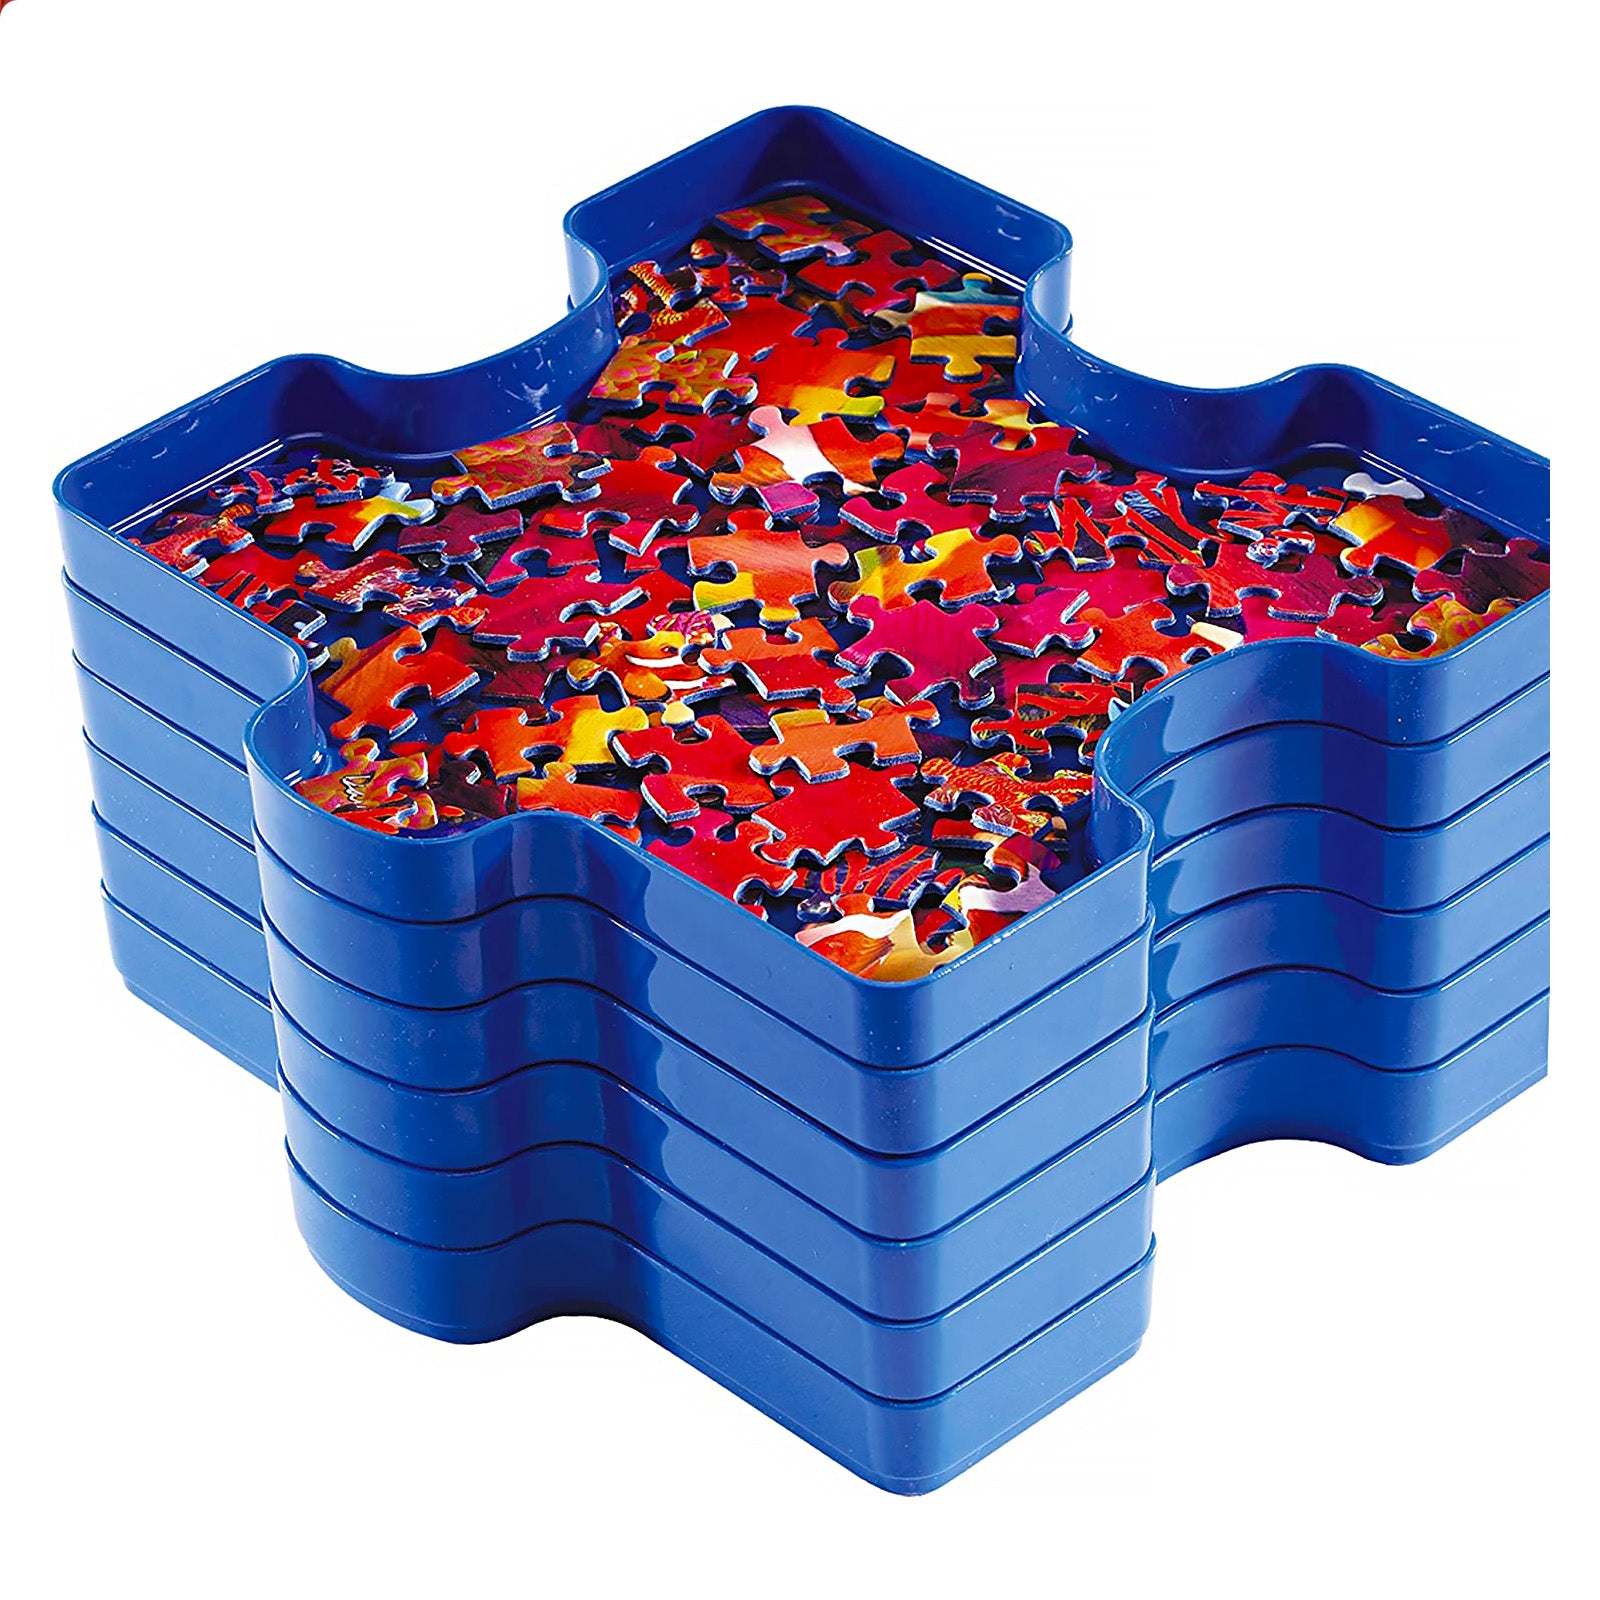 The right 1000-piece jigsaw puzzle sorting tray can also help tidy up the appearance of your workspace.